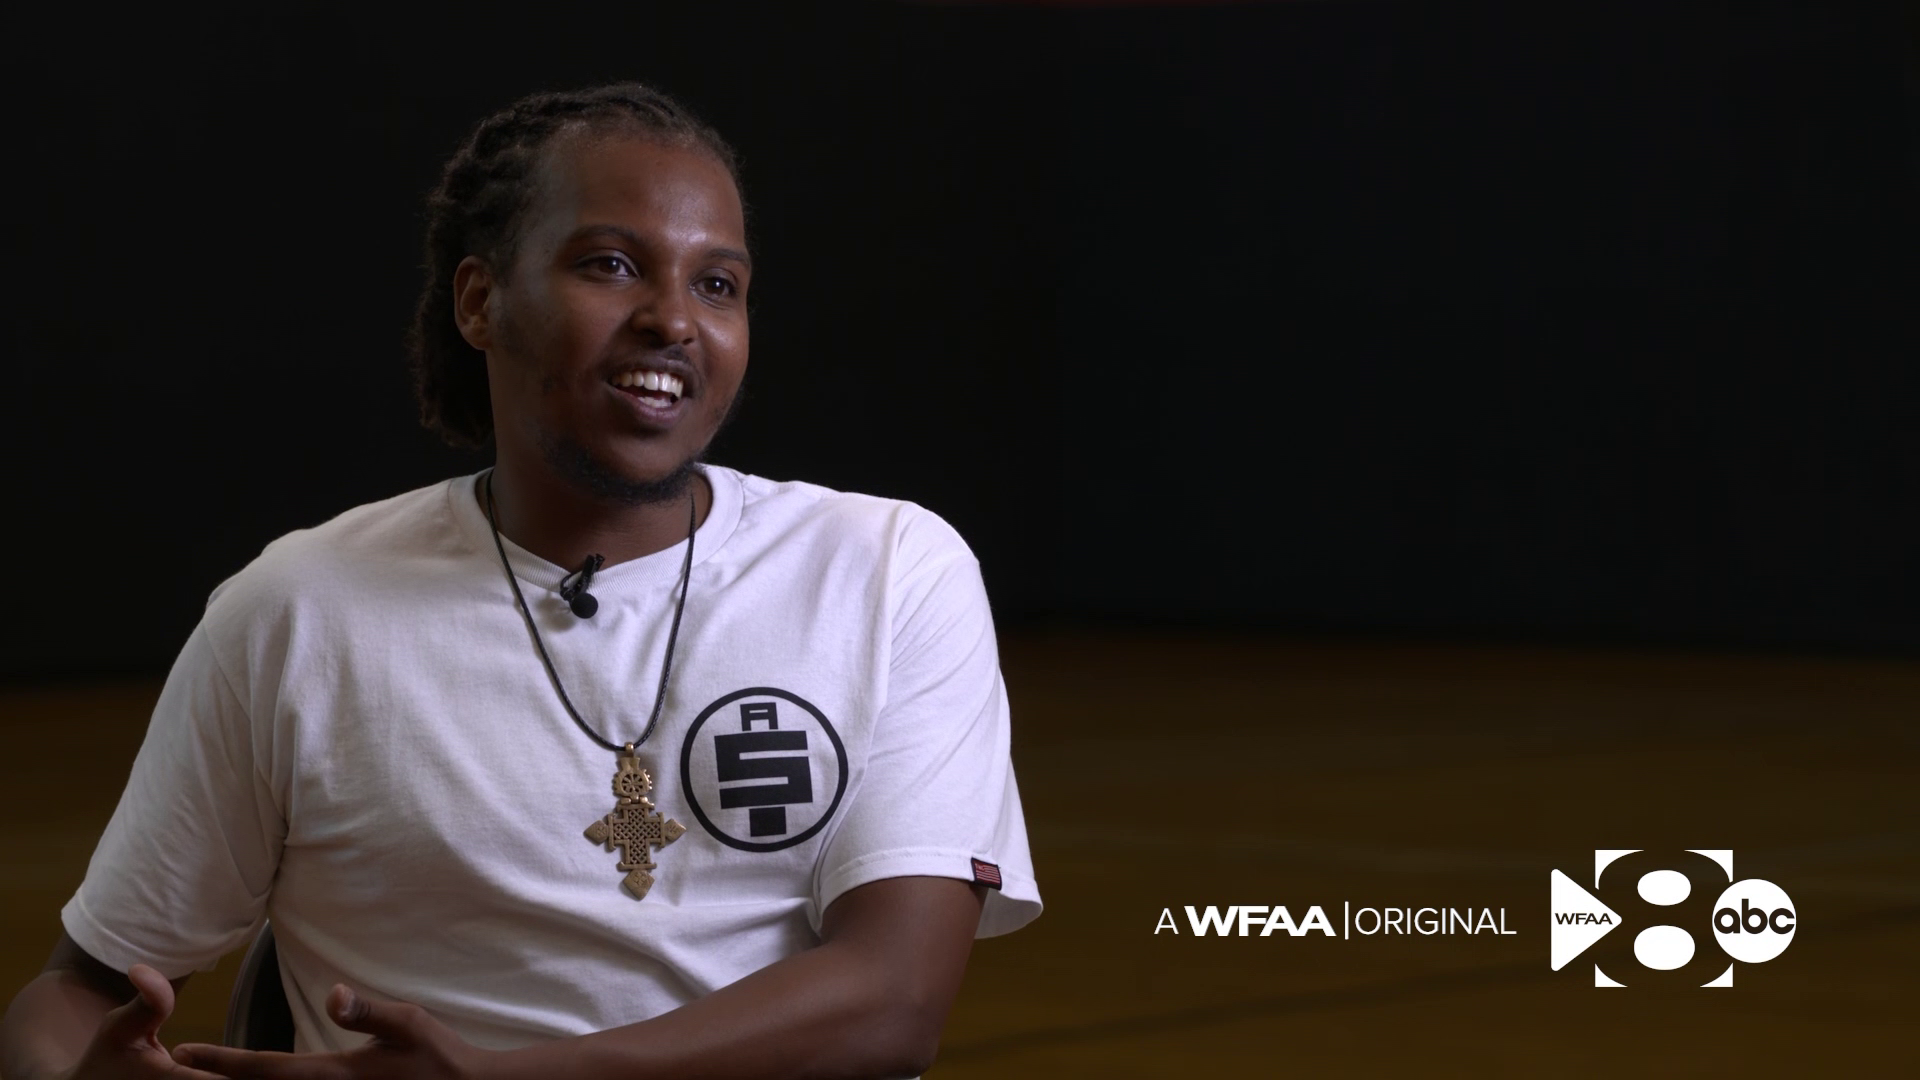 Master Tesfatsion's background and his experiences give him the ability to connect with his subjects in a way that's deeper than the game.